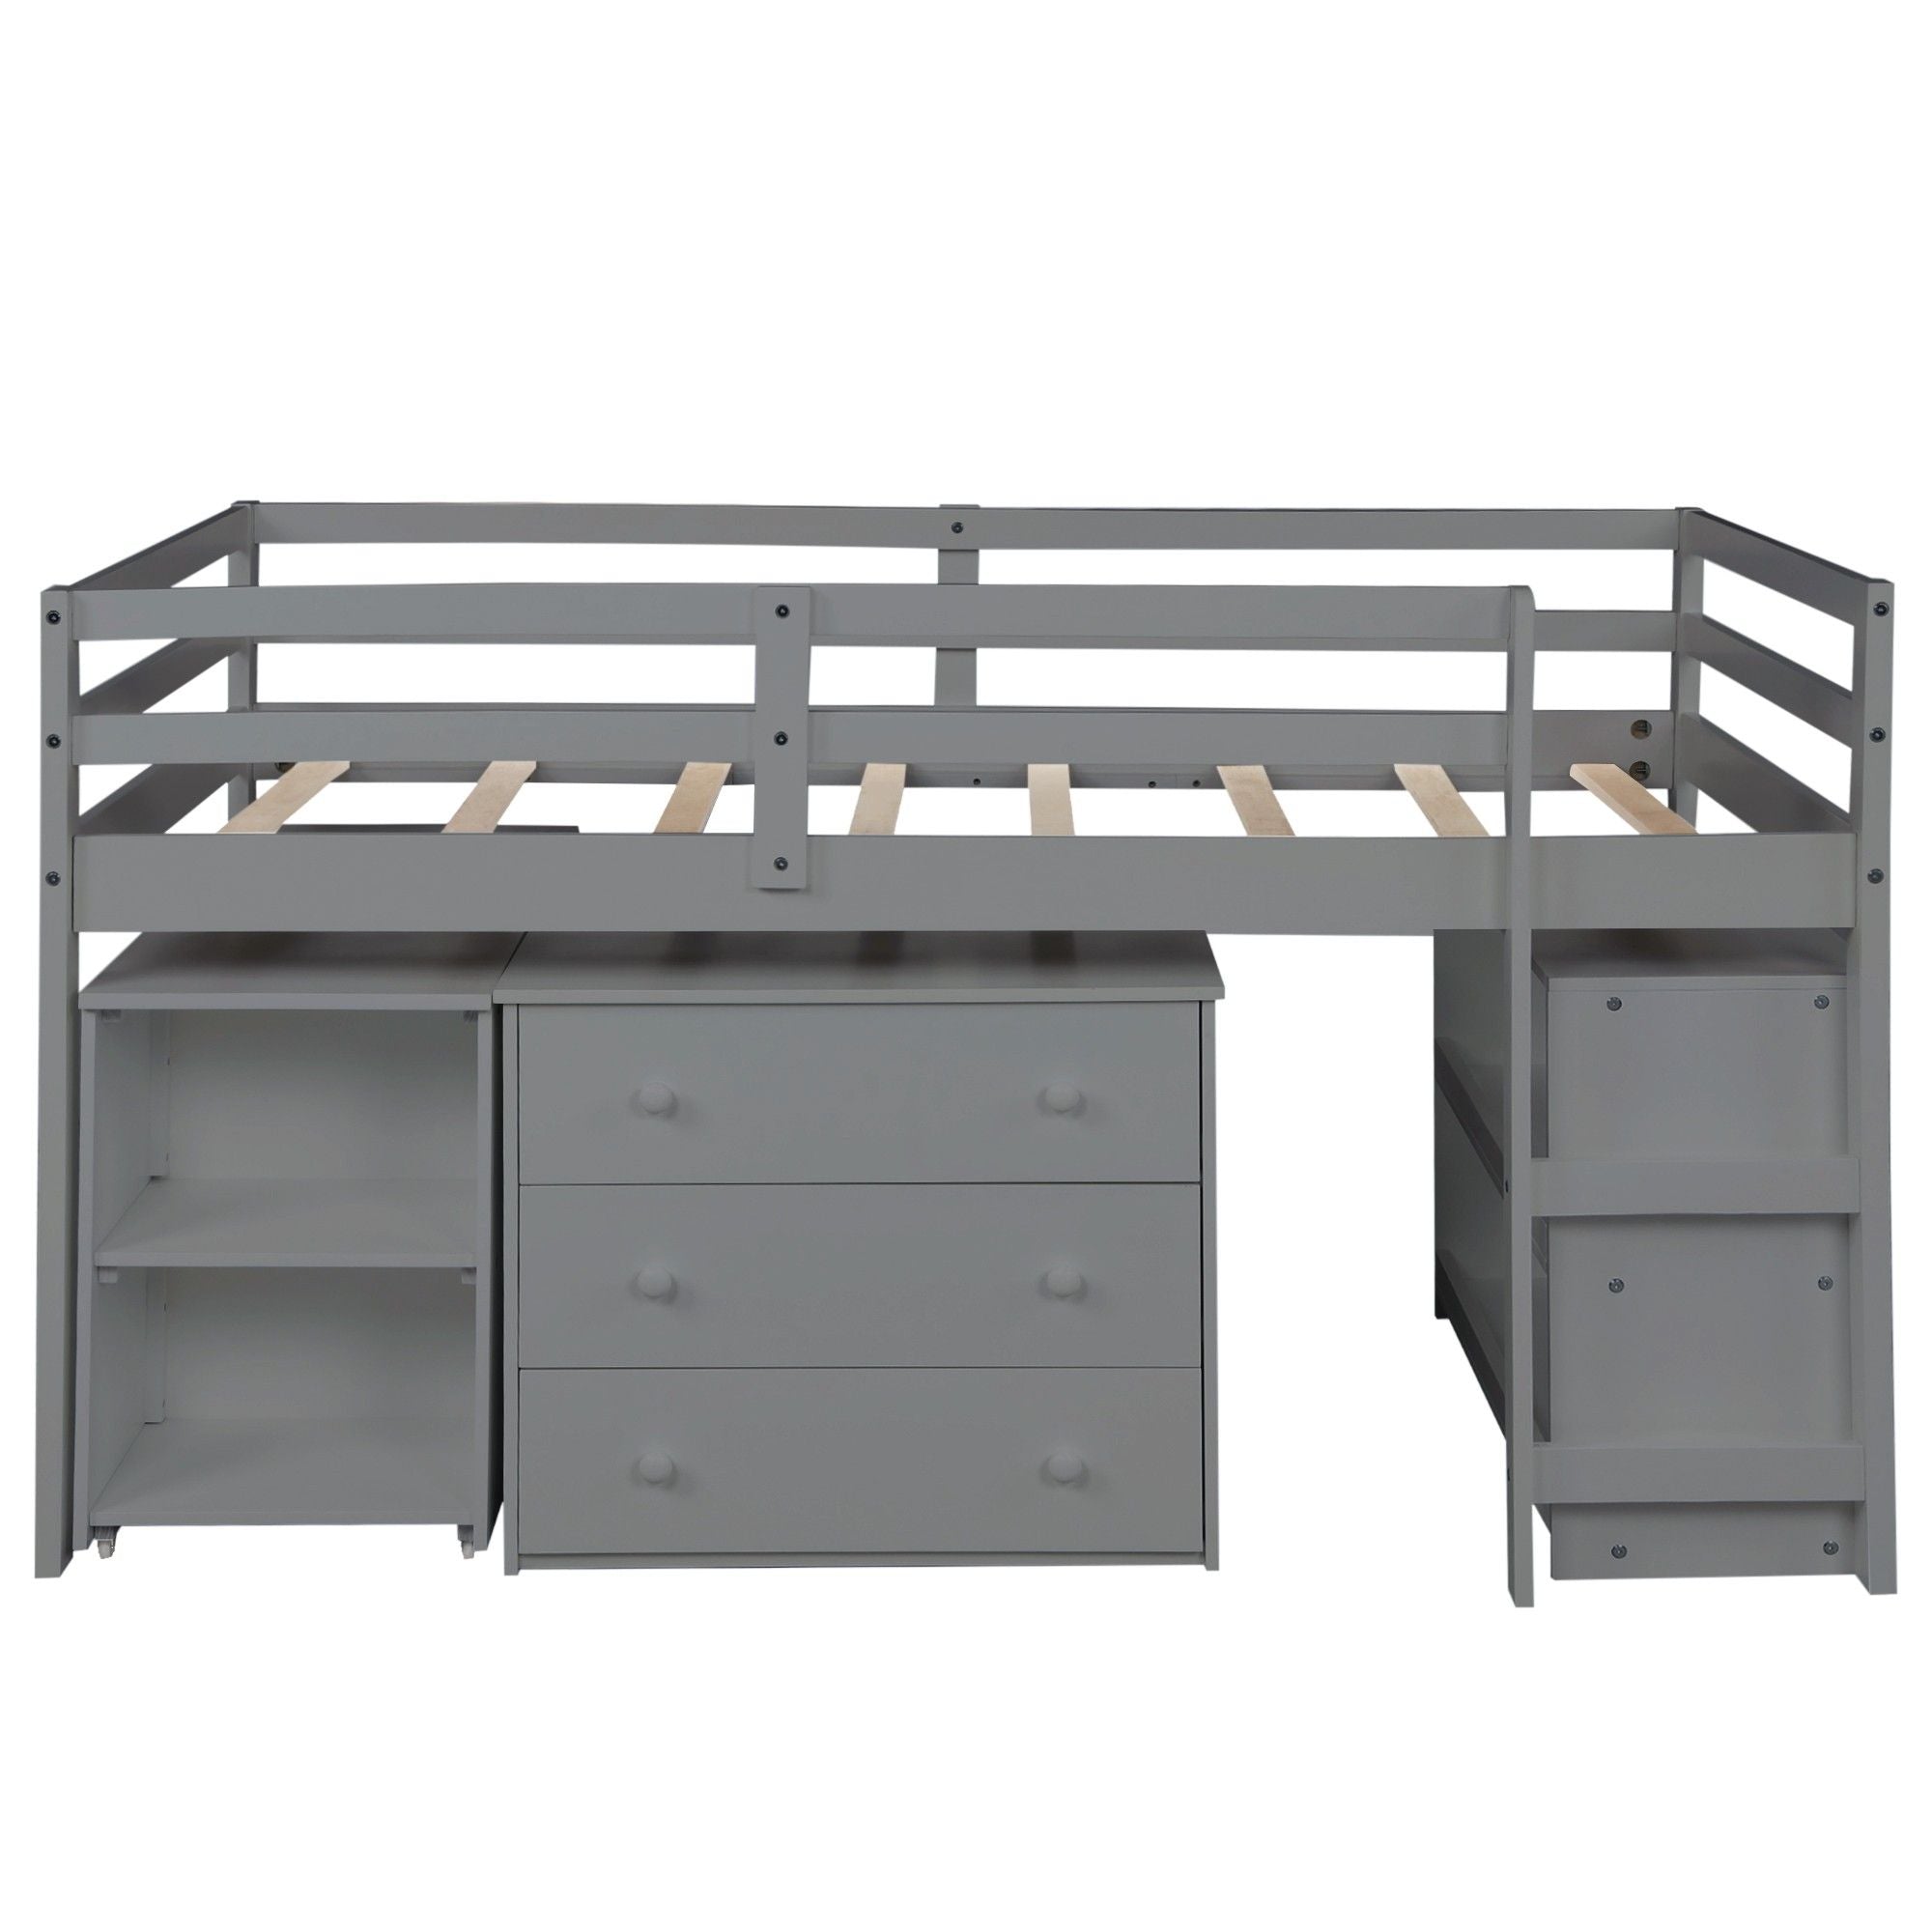 Low Twin Loft Bed With Cabinet and Desk - Gray